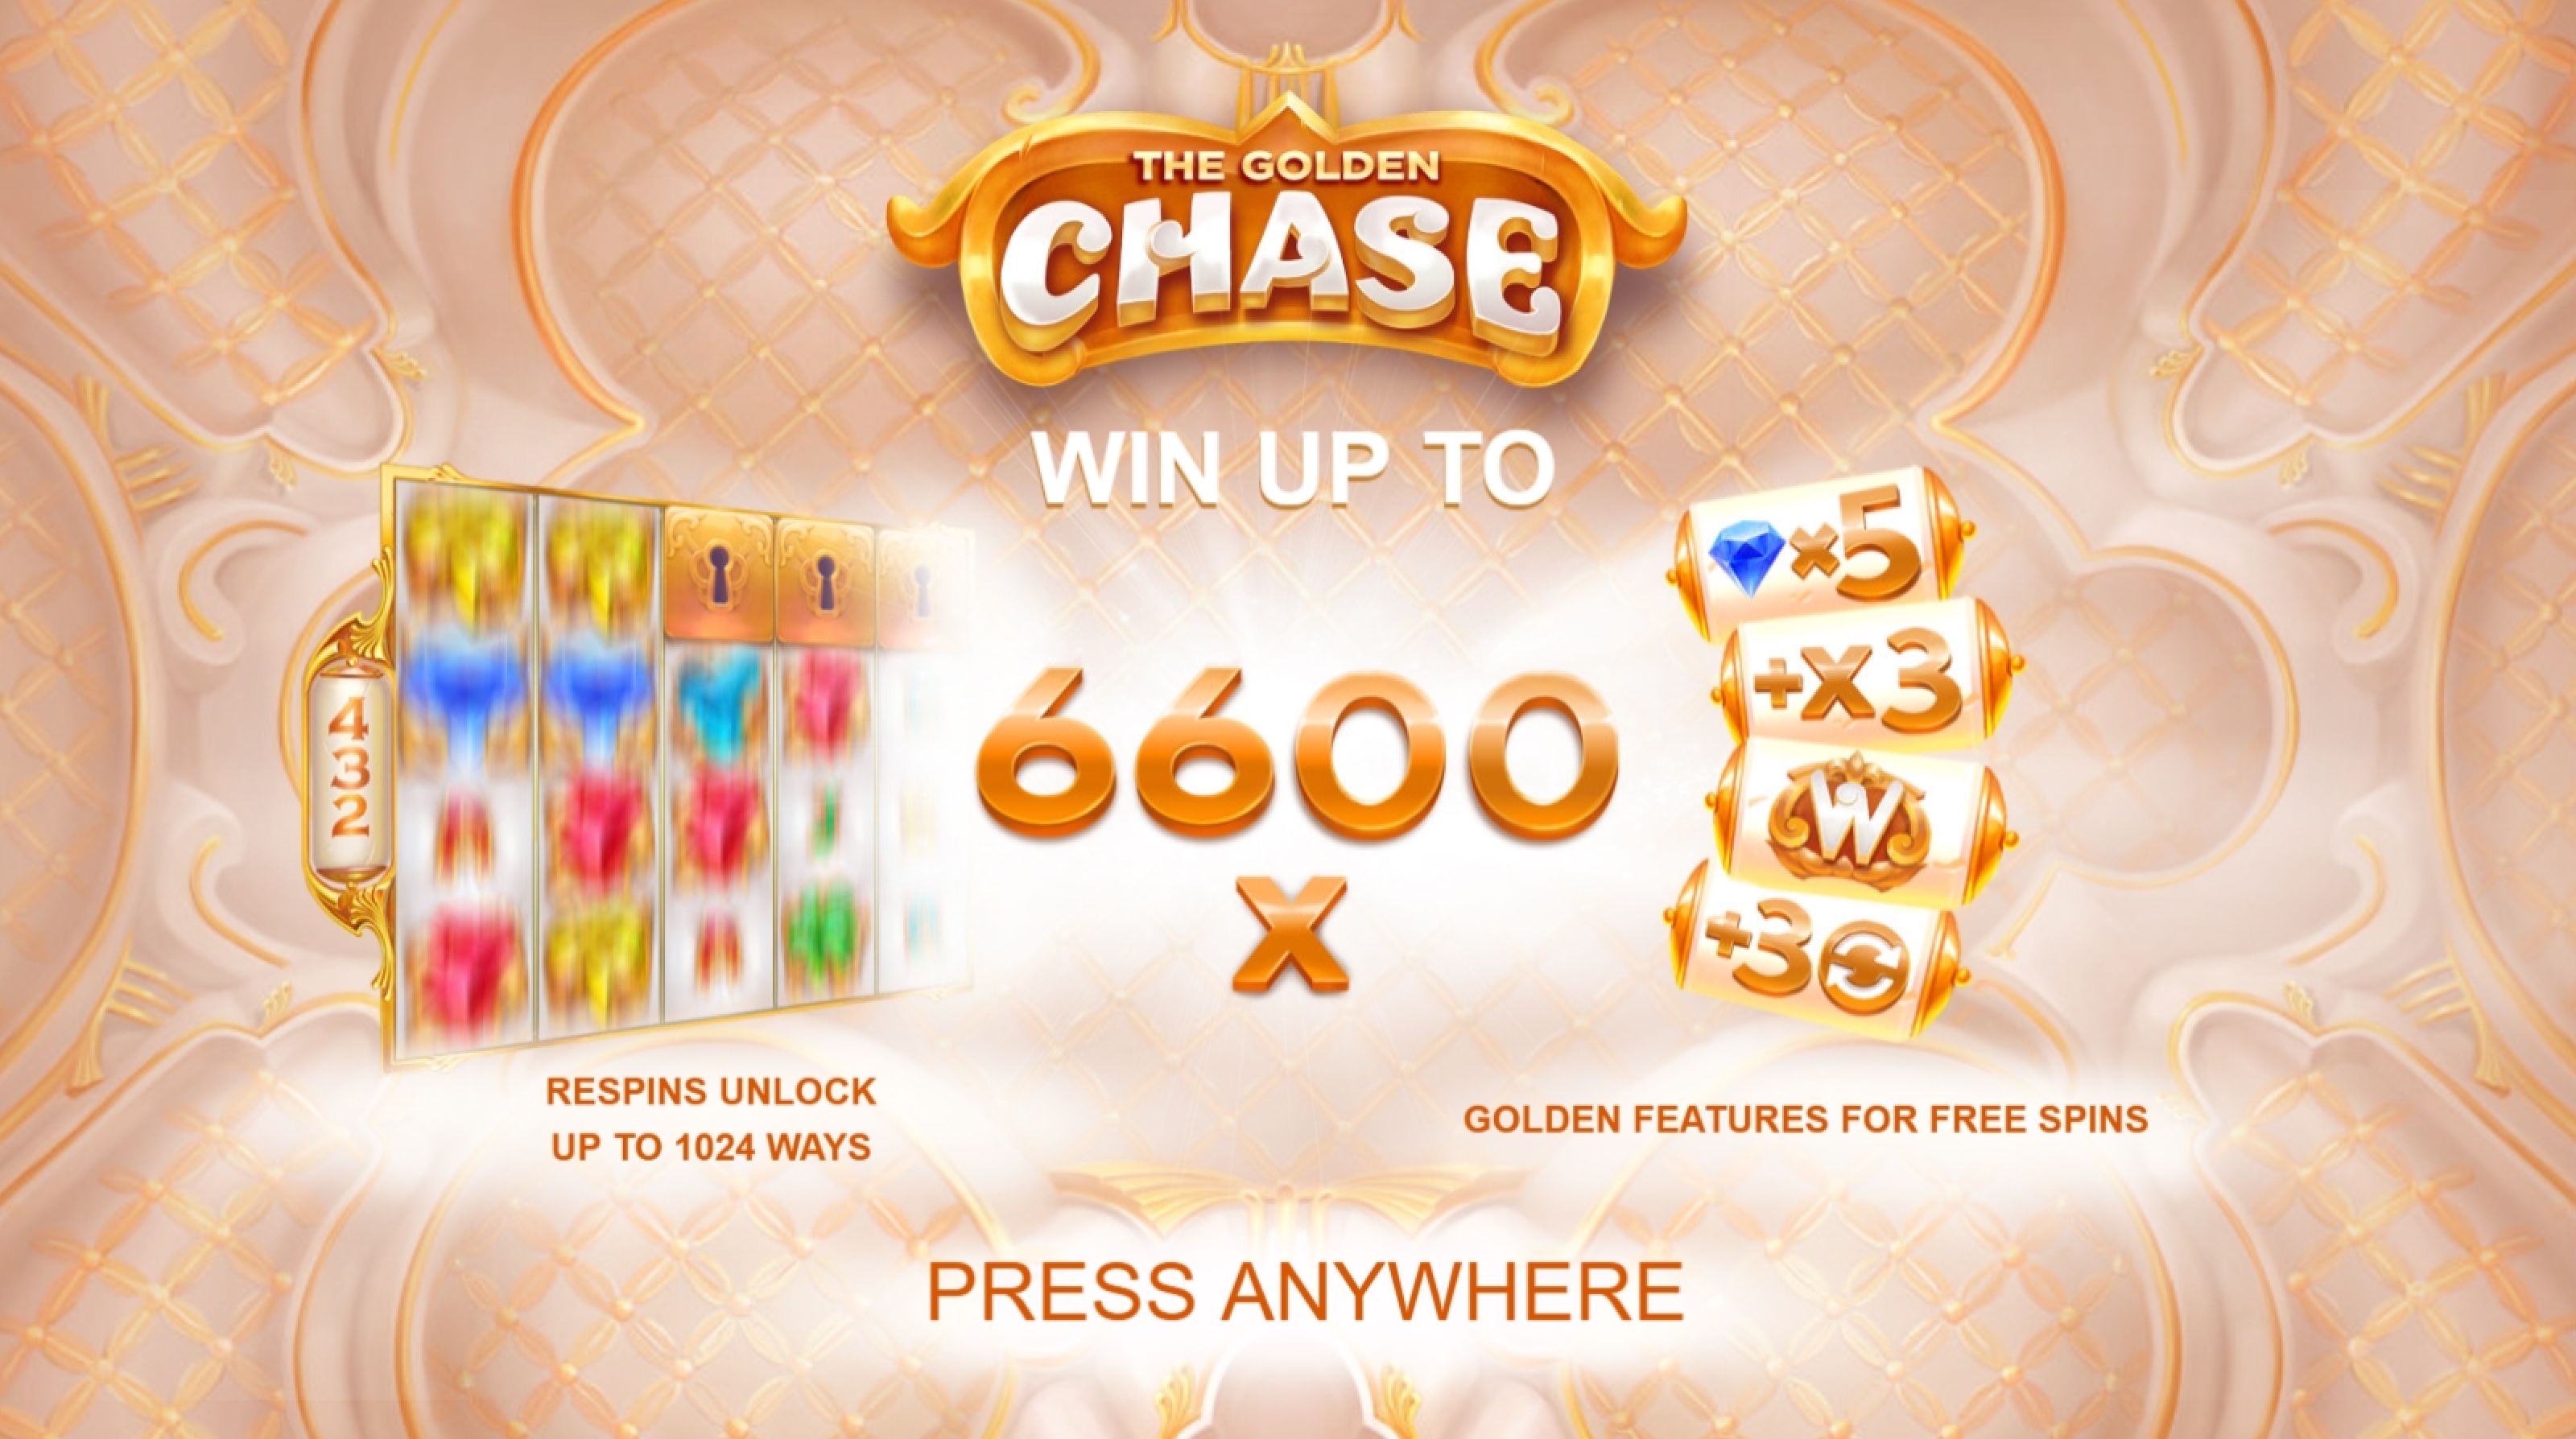 Play The Golden Chase Free Casino Slot Game by STHLM Gaming